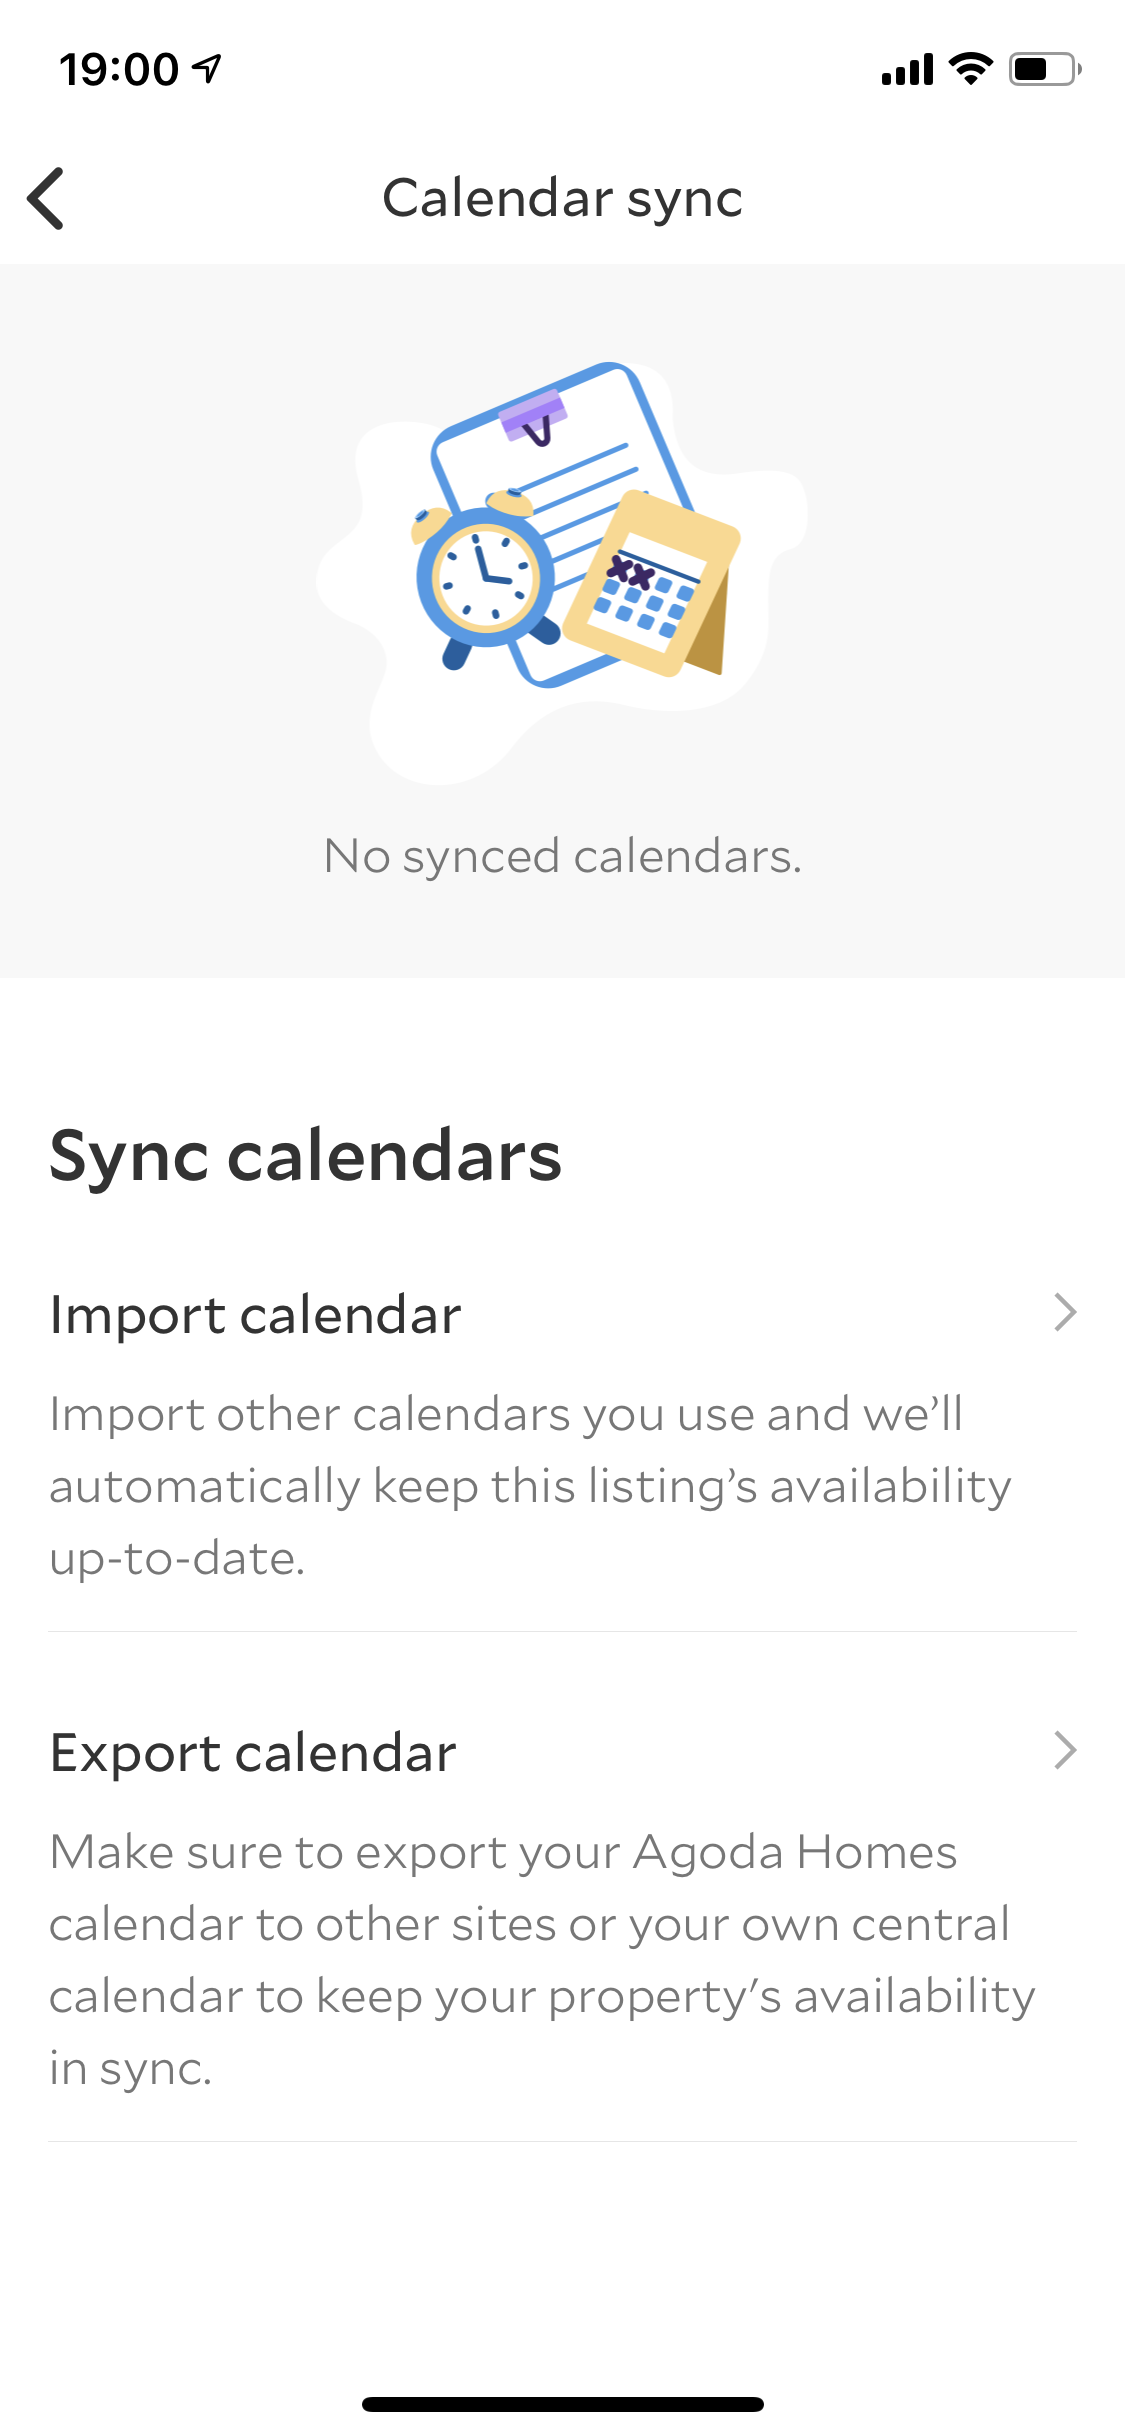 20.Set_which_days_can_be_booked_and_sync_your_calendar_with_other_platforms_6.PNG